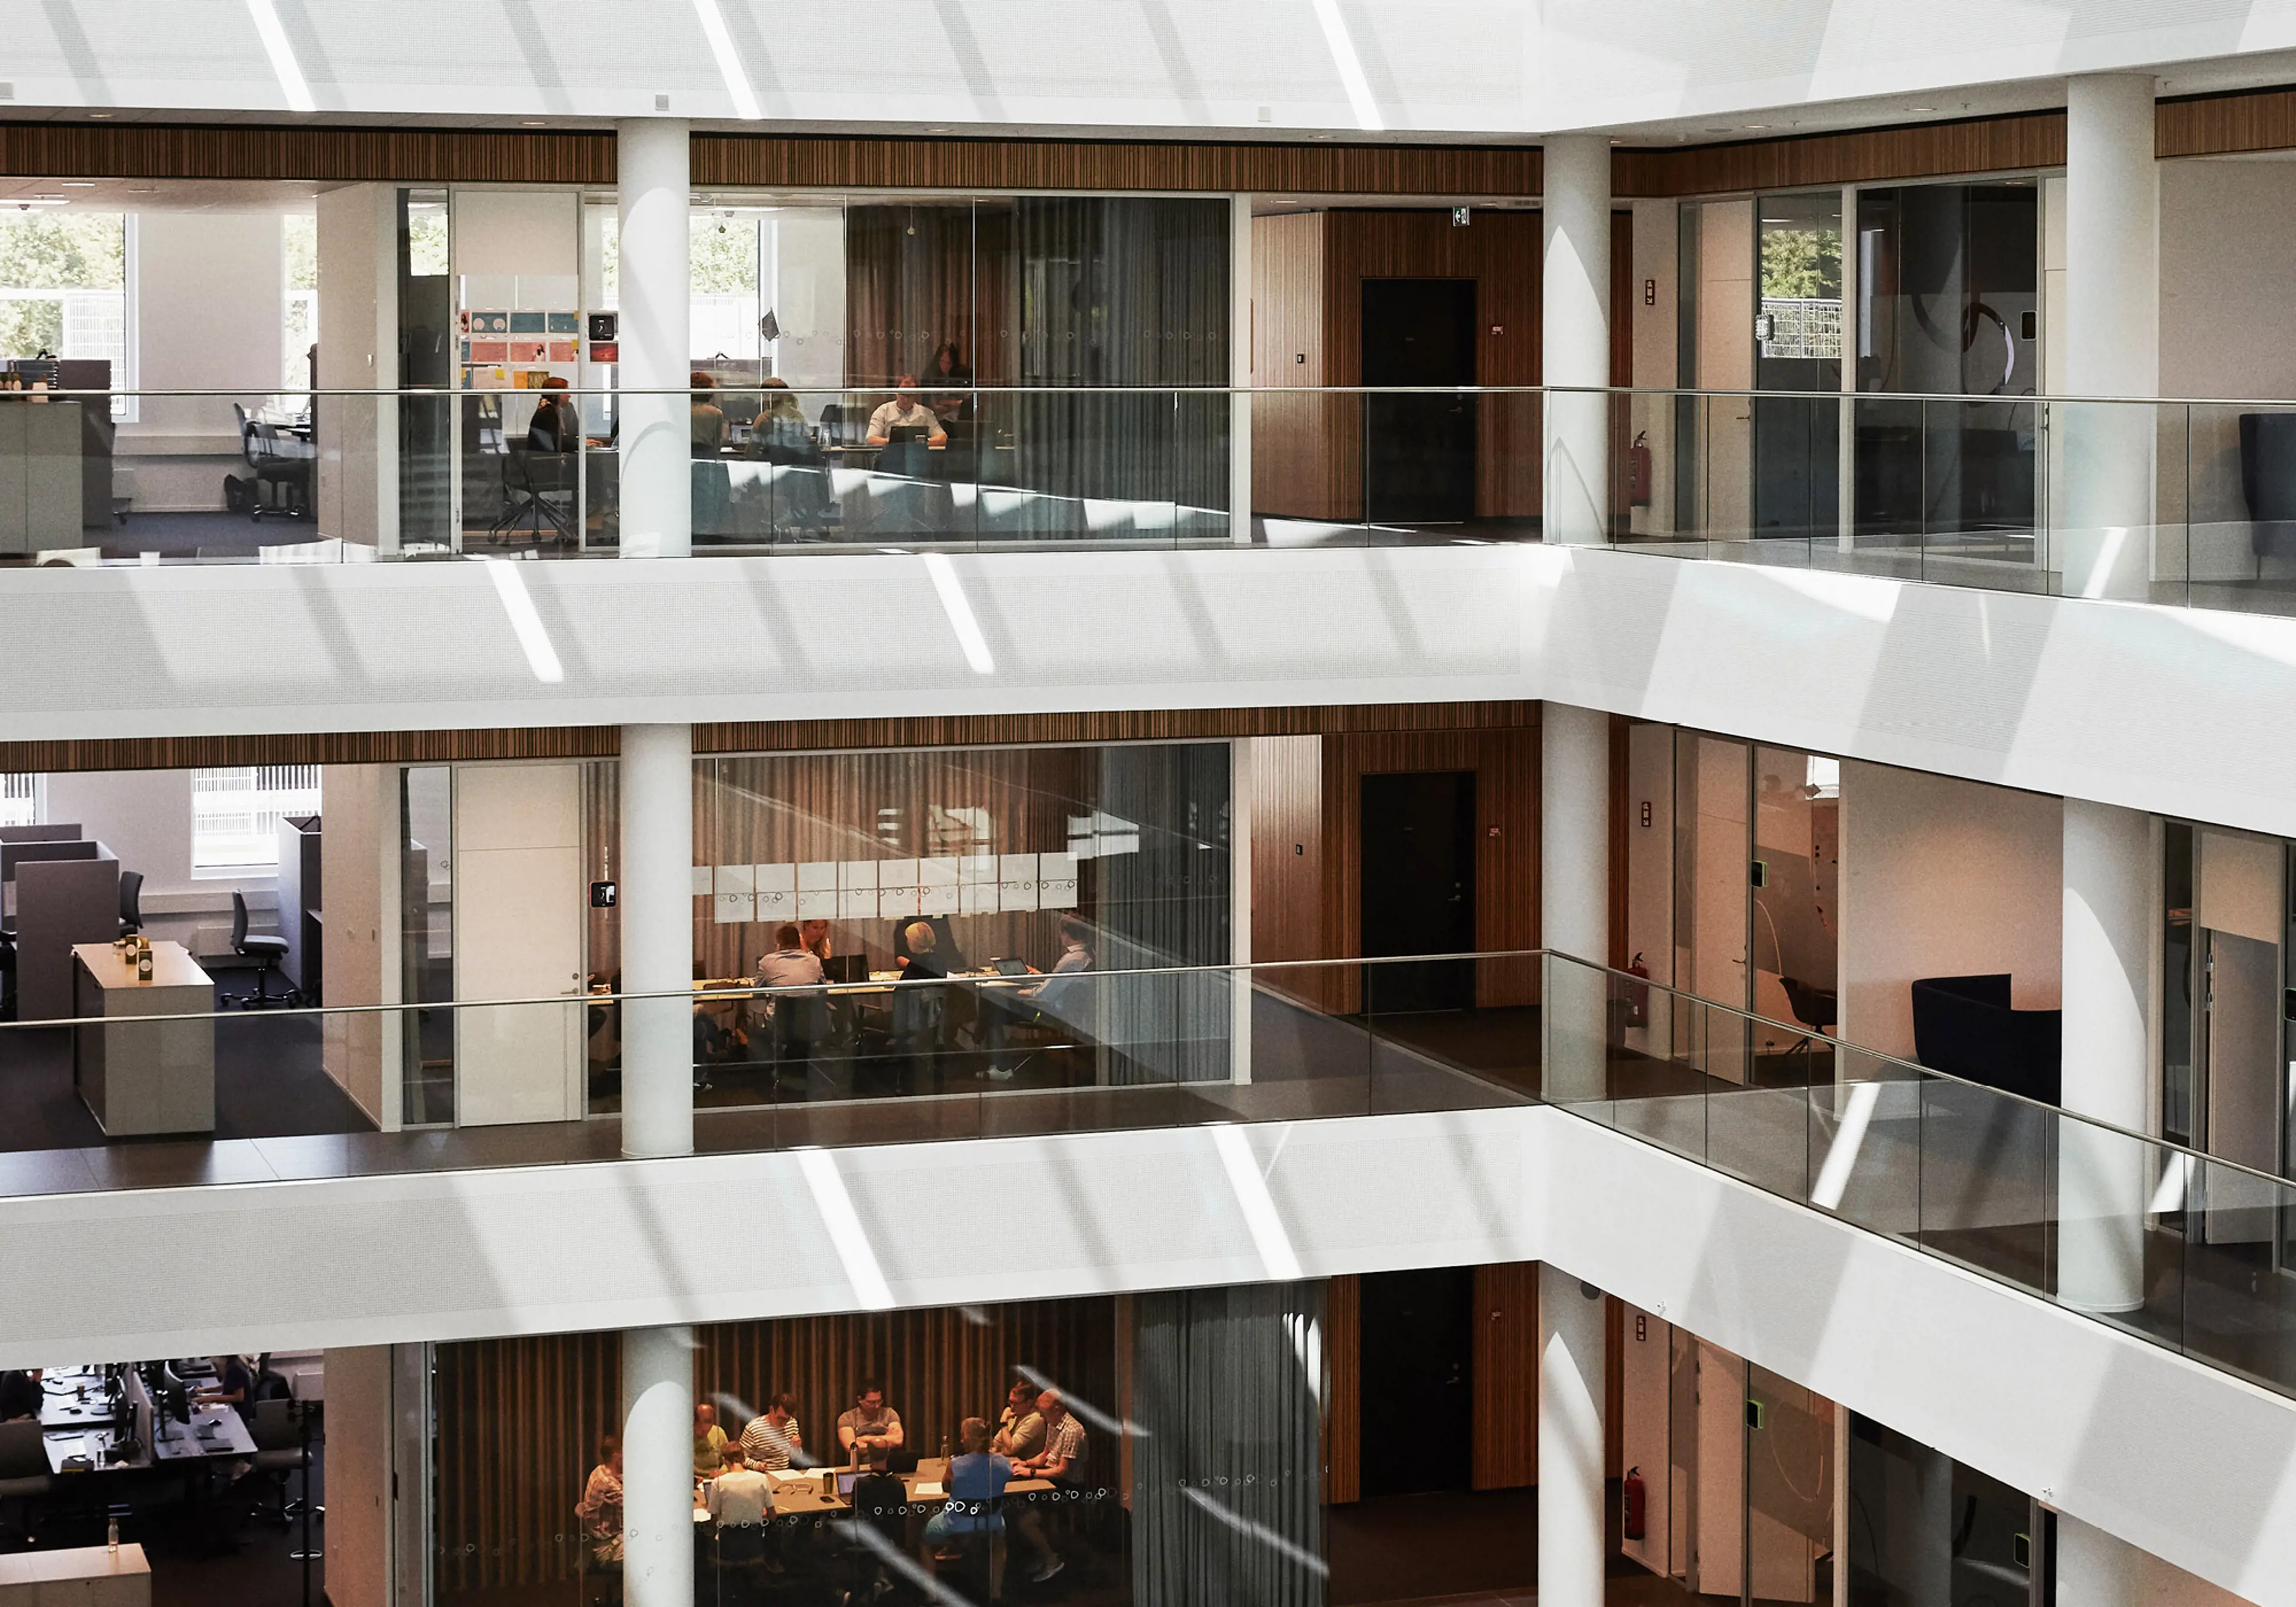 View of offices & meeting rooms spread over 3 levels: people are visible through transparent glass panels